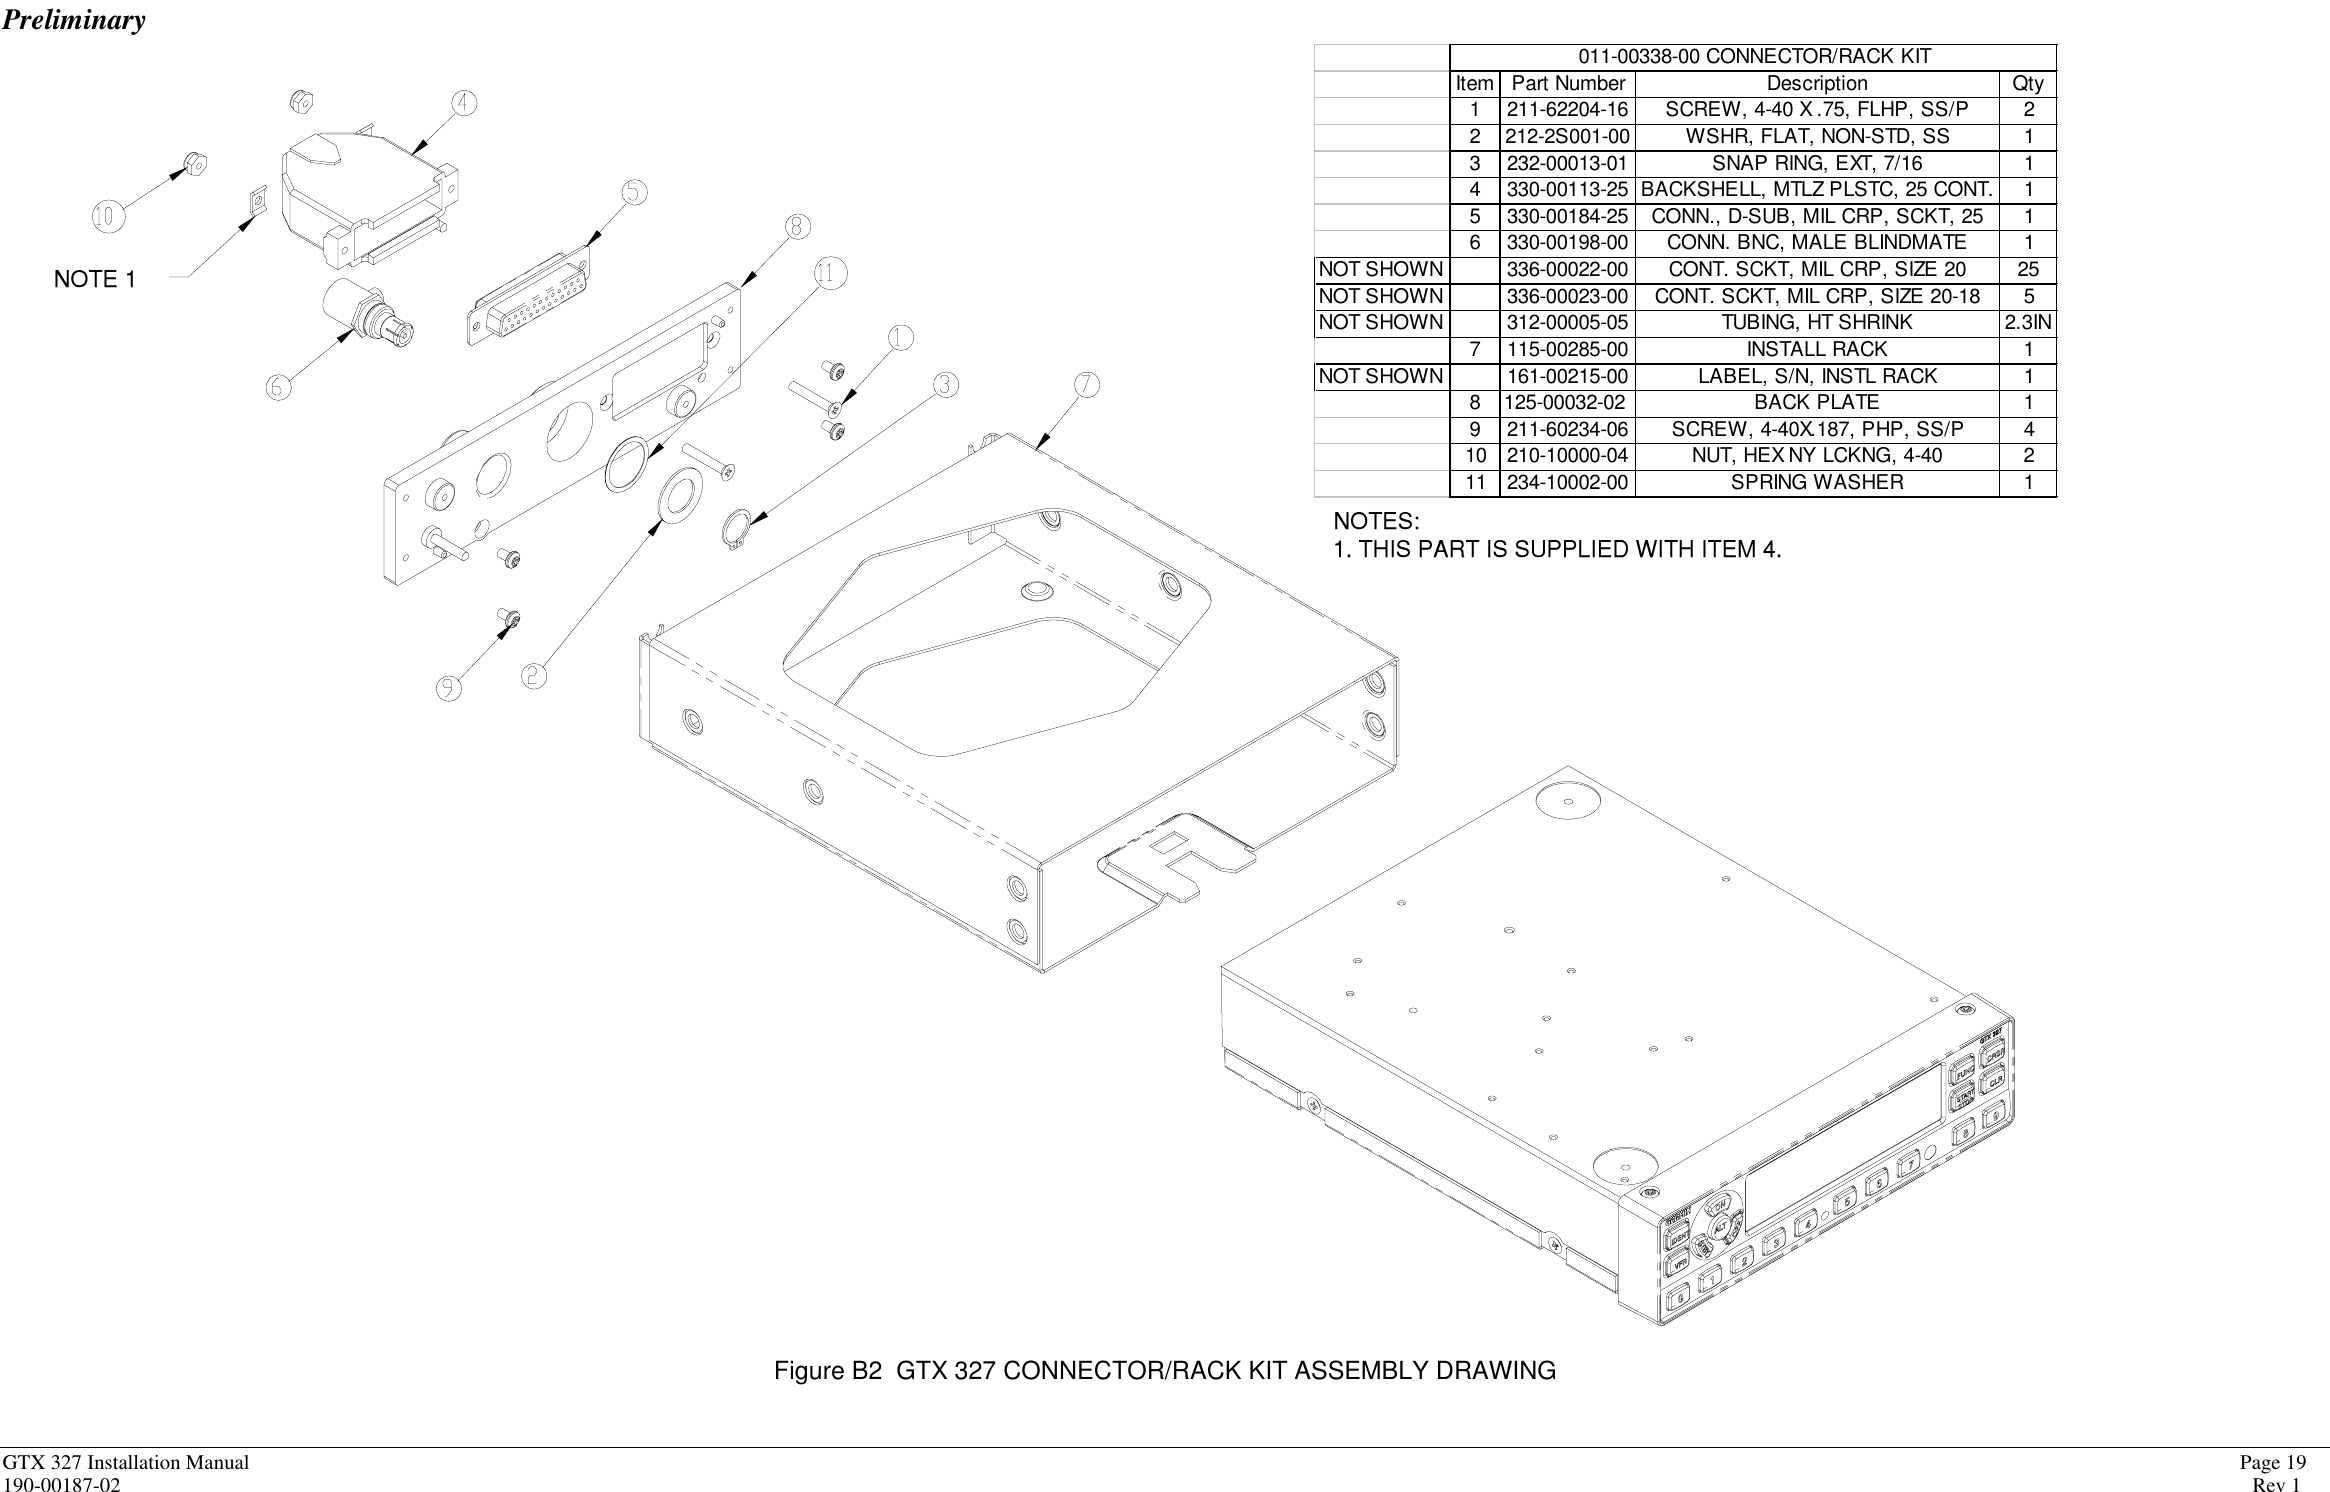 PreliminaryGTX 327 Installation Manual             Page 19190-00187-02 Rev 1Item Part Number Description Qty1 211-62204-16 SCREW, 4-40 X .75, FLHP, SS/P 22 212-2S001-00 WSHR, FLAT, NON-STD, SS 13 232-00013-01 SNAP RING, EXT, 7/16 14 330-00113-25 BACKSHELL, MTLZ PLSTC, 25 CONT. 15 330-00184-25 CONN., D-SUB, MIL CRP, SCKT, 25 16 330-00198-00 CONN. BNC, MALE BLINDMATE 1NOT SHOWN 336-00022-00 CONT. SCKT, MIL CRP, SIZE 20 25NOT SHOWN 336-00023-00 CONT. SCKT, MIL CRP, SIZE 20-18 5NOT SHOWN 312-00005-05 TUBING, HT SHRINK 2.3IN7 115-00285-00 INSTALL RACK 1NOT SHOWN 161-00215-00 LABEL, S/N, INSTL RACK 18 125-00032-02 BACK PLATE 19 211-60234-06 SCREW, 4-40X.187, PHP, SS/P 410 210-10000-04 NUT, HEX NY LCKNG, 4-40 211 234-10002-00 SPRING WASHER 1011-00338-00 CONNECTOR/RACK KITNOTES:1. THIS PART IS SUPPLIED WITH ITEM 4.NOTE 1Figure B2  GTX 327 CONNECTOR/RACK KIT ASSEMBLY DRAWING